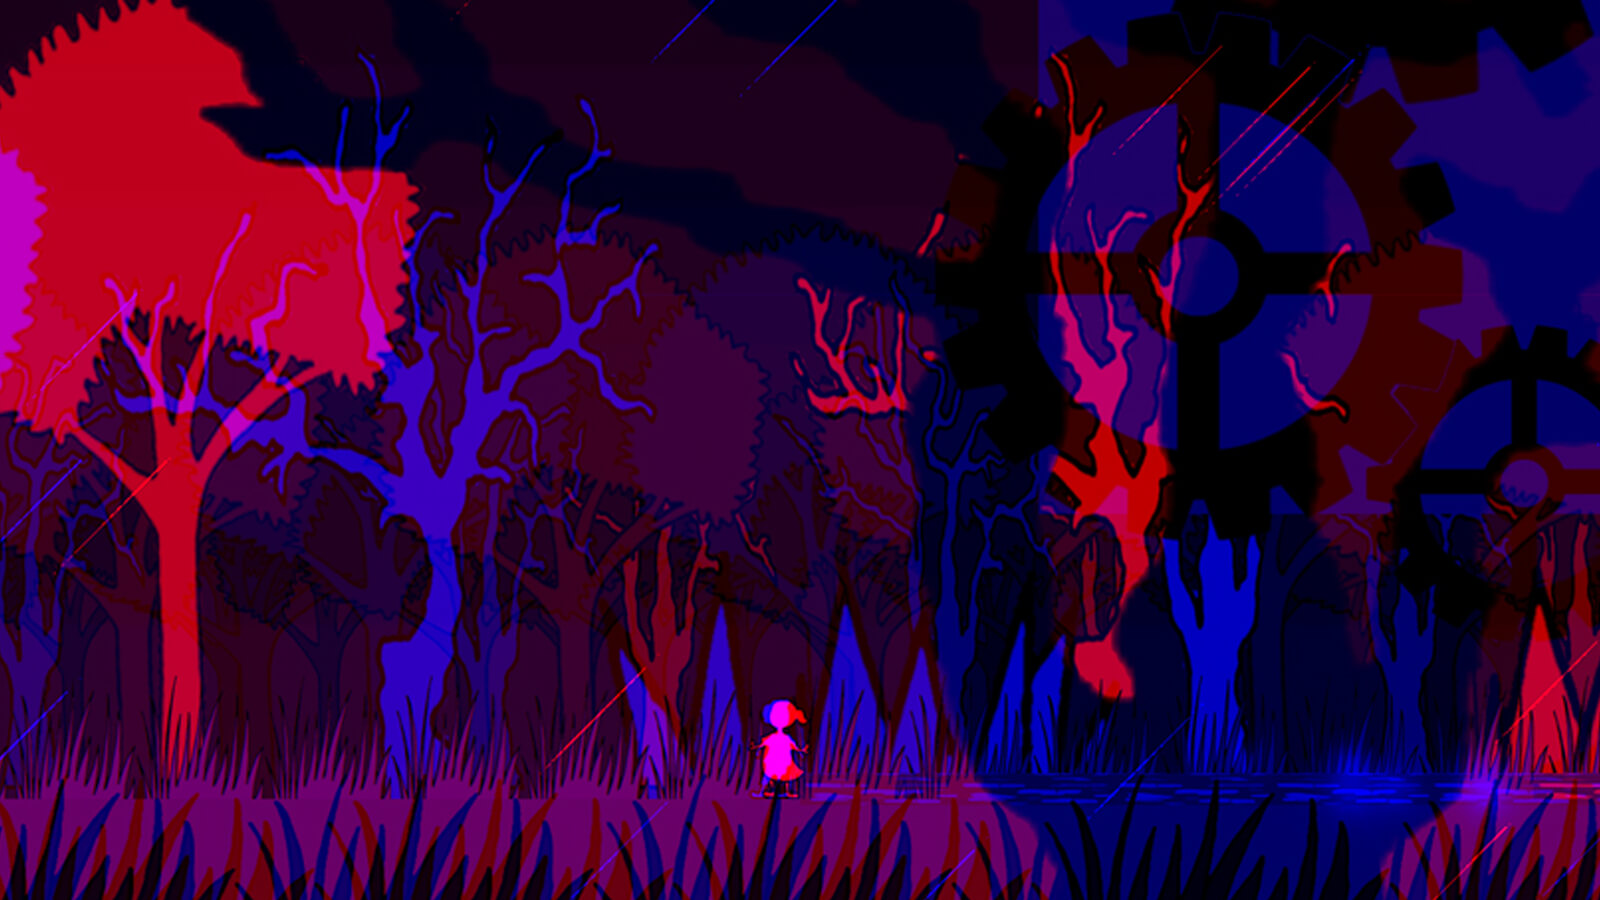 A small girl stands among trees rendered in reds, blues and purples.